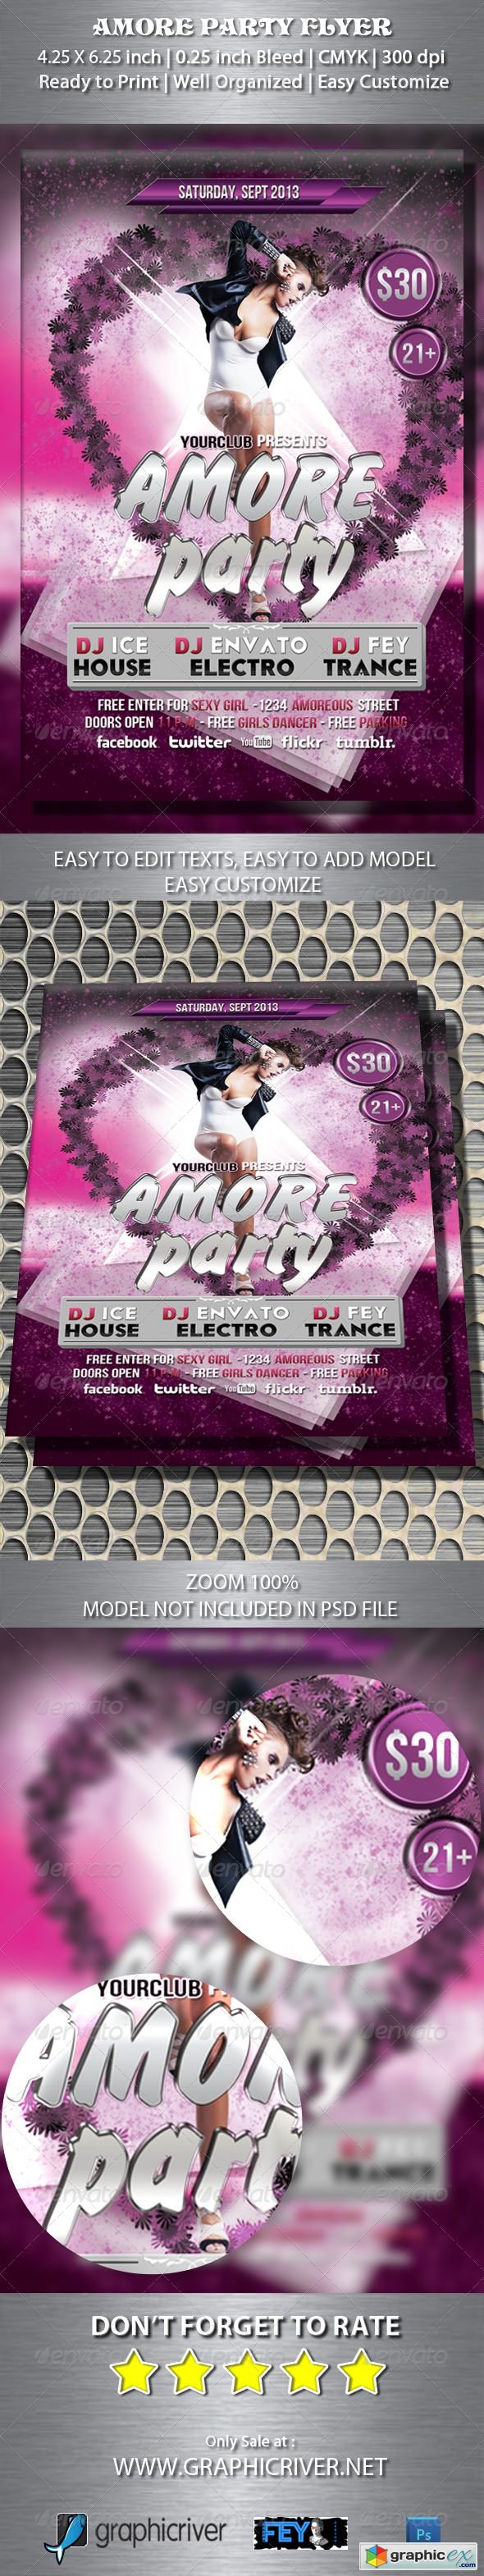 Amore Party Flyer 5365824